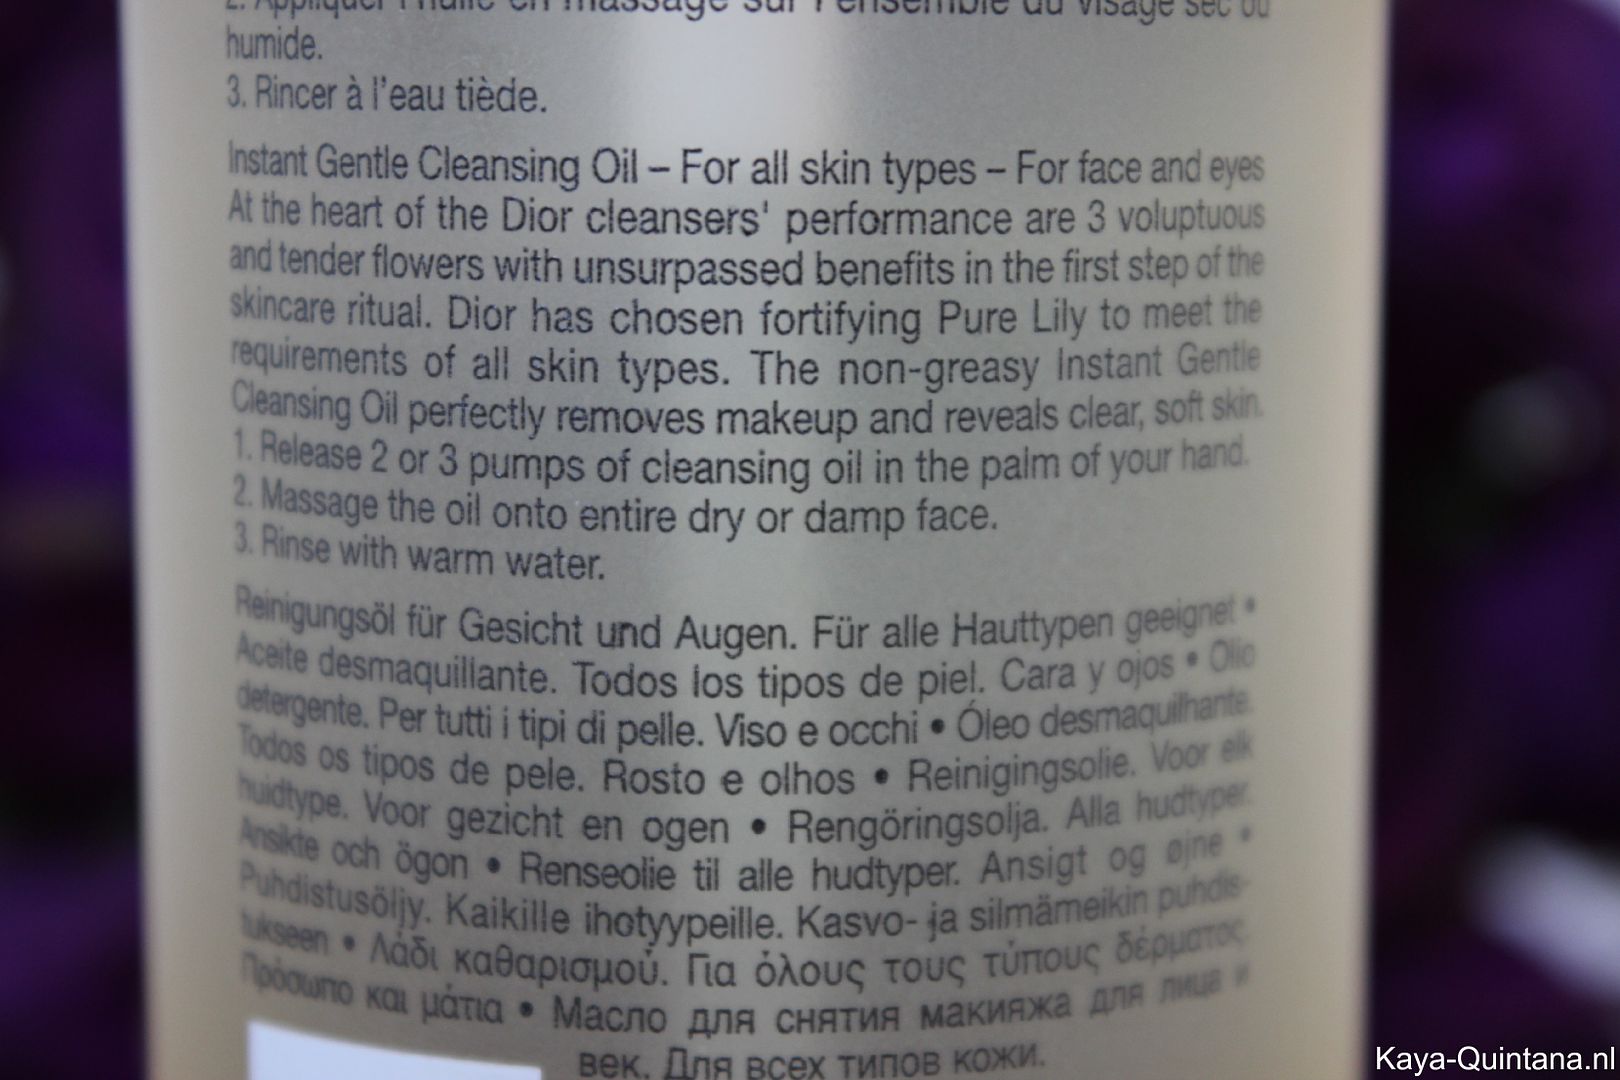 dior gentle cleansing oil for all skintypes